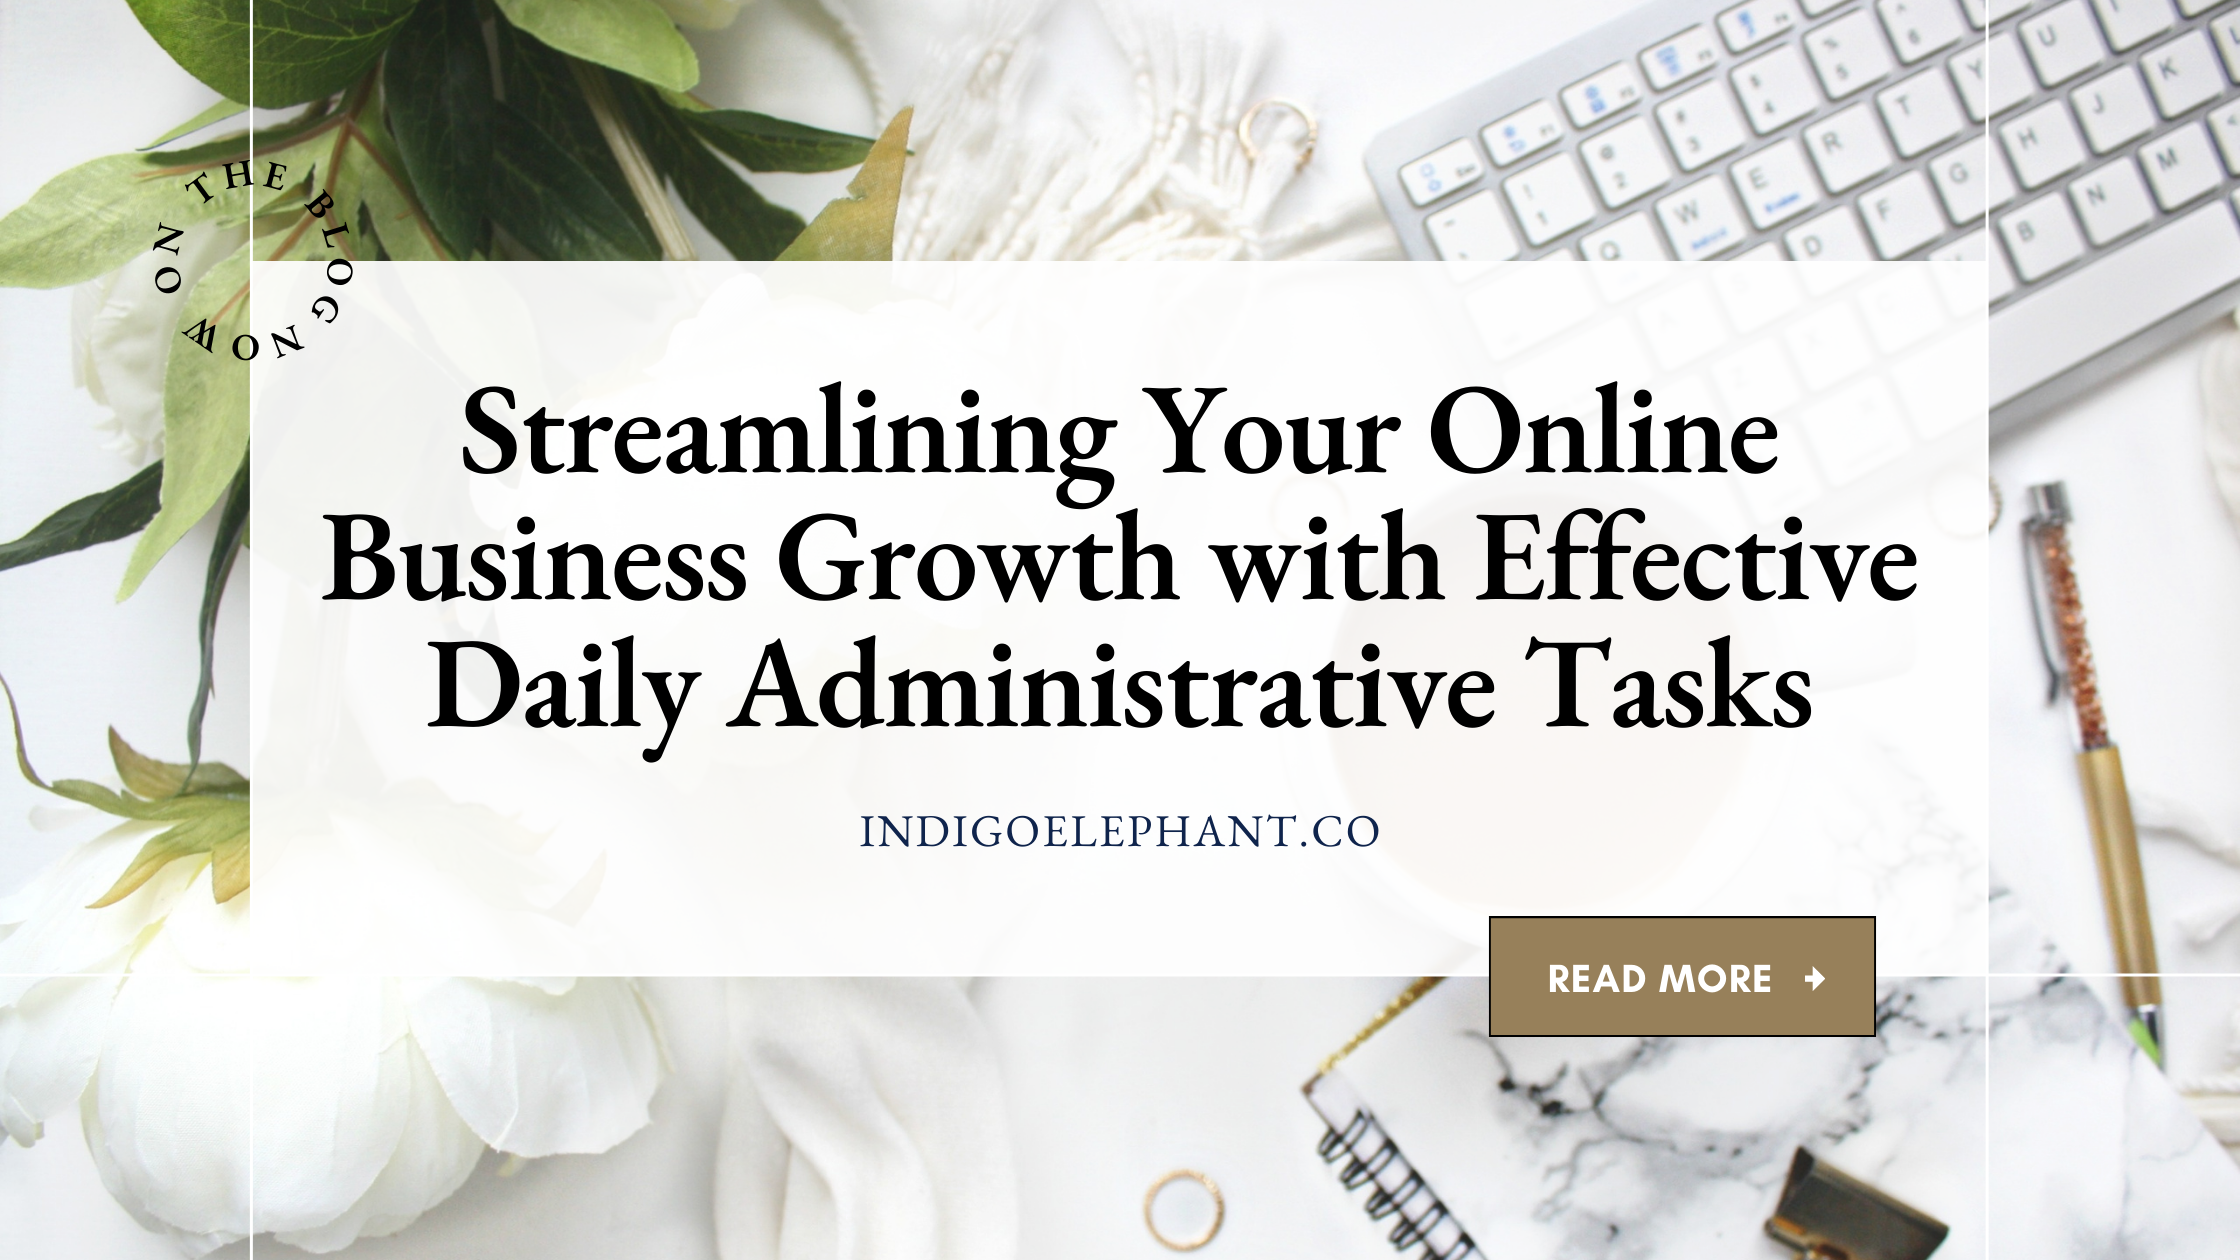 Streamlining Your Online Business Growth with Effective Daily Administrative Tasks